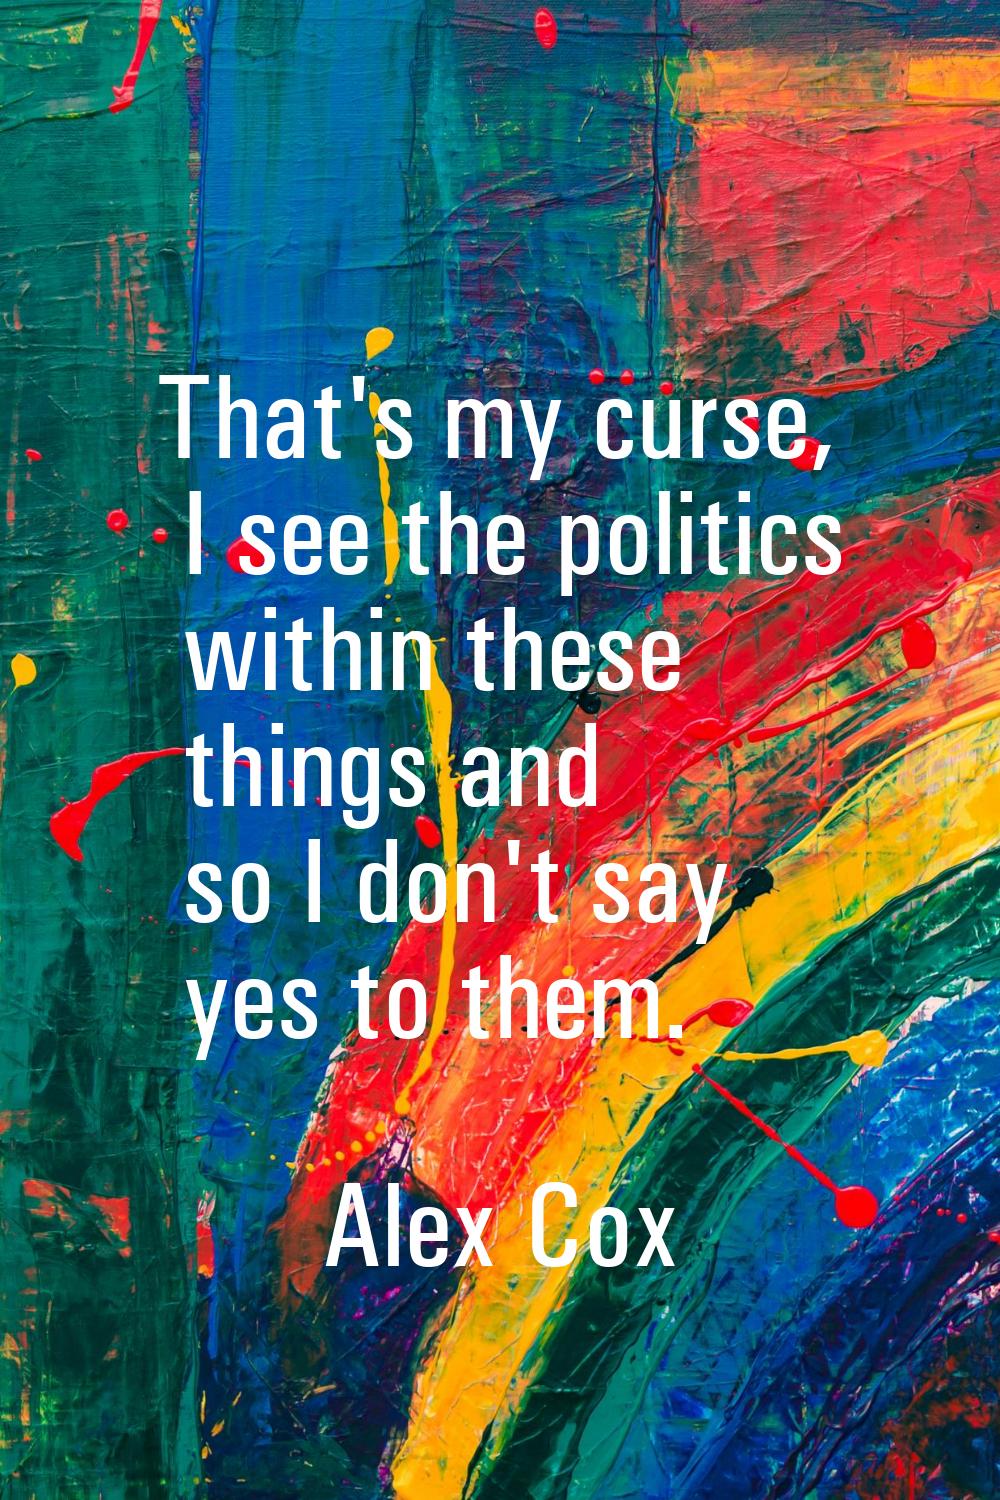 That's my curse, I see the politics within these things and so I don't say yes to them.